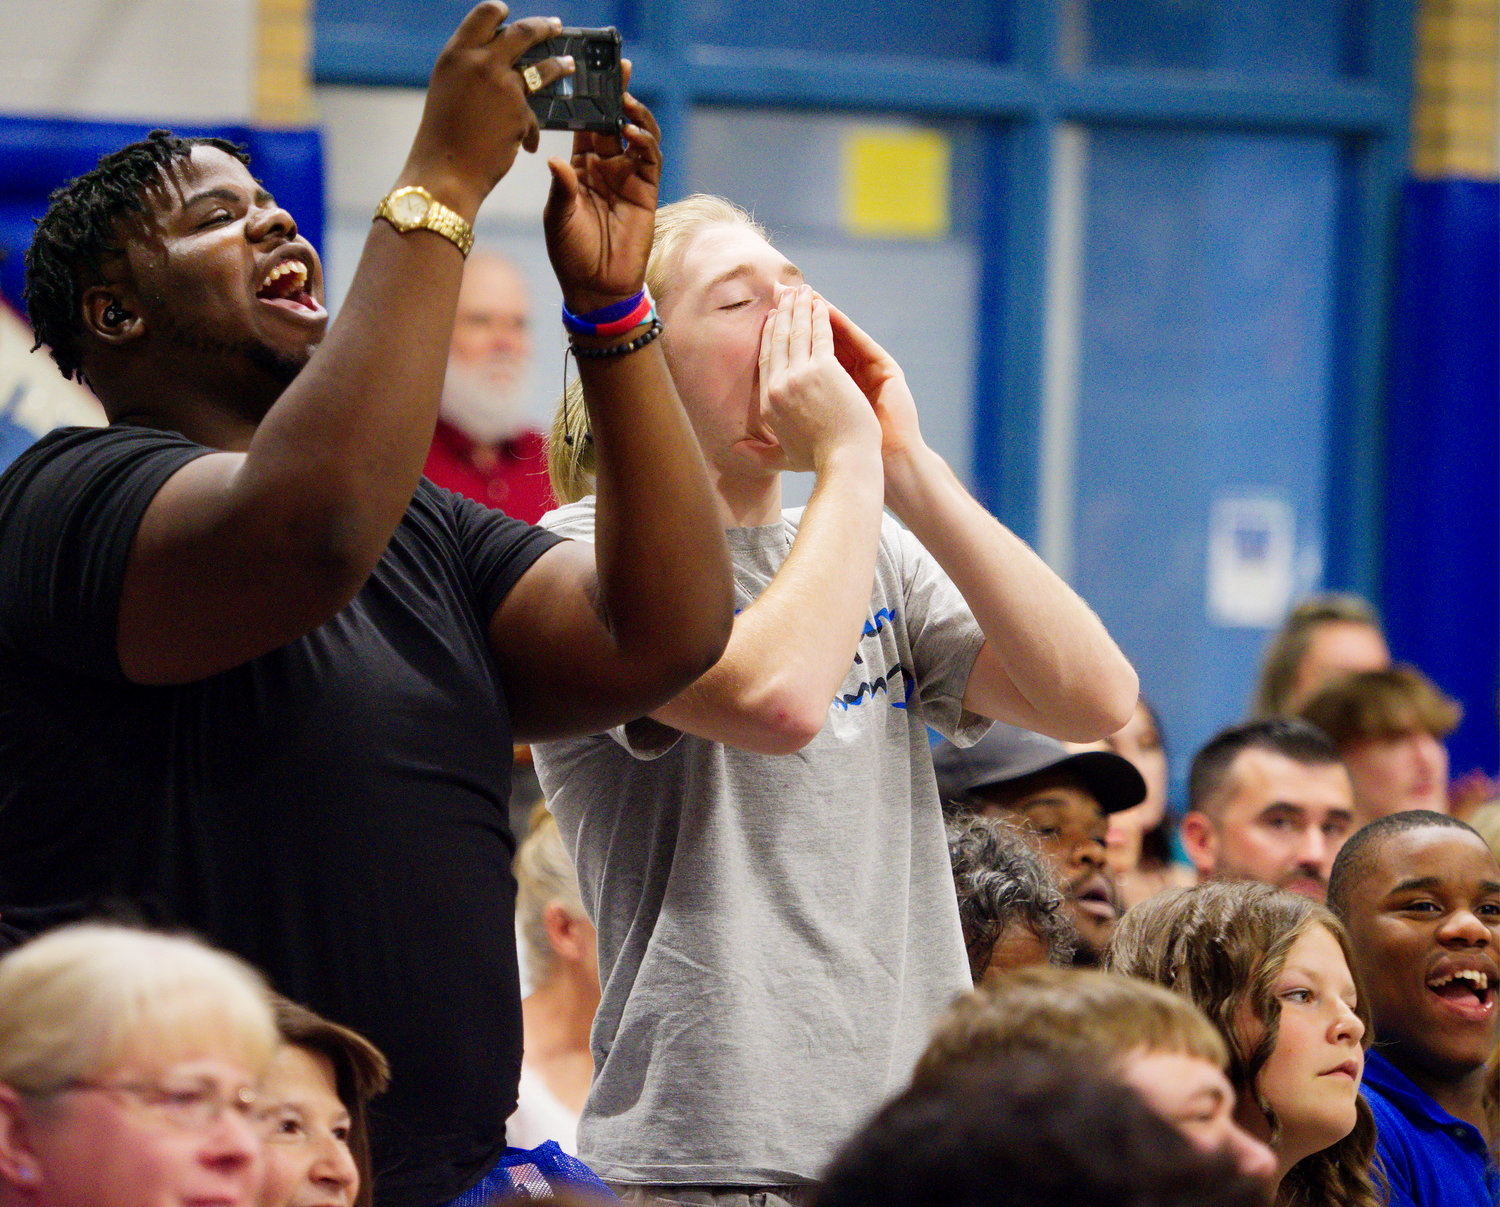 Audience members at Quitman graduation show their approval.